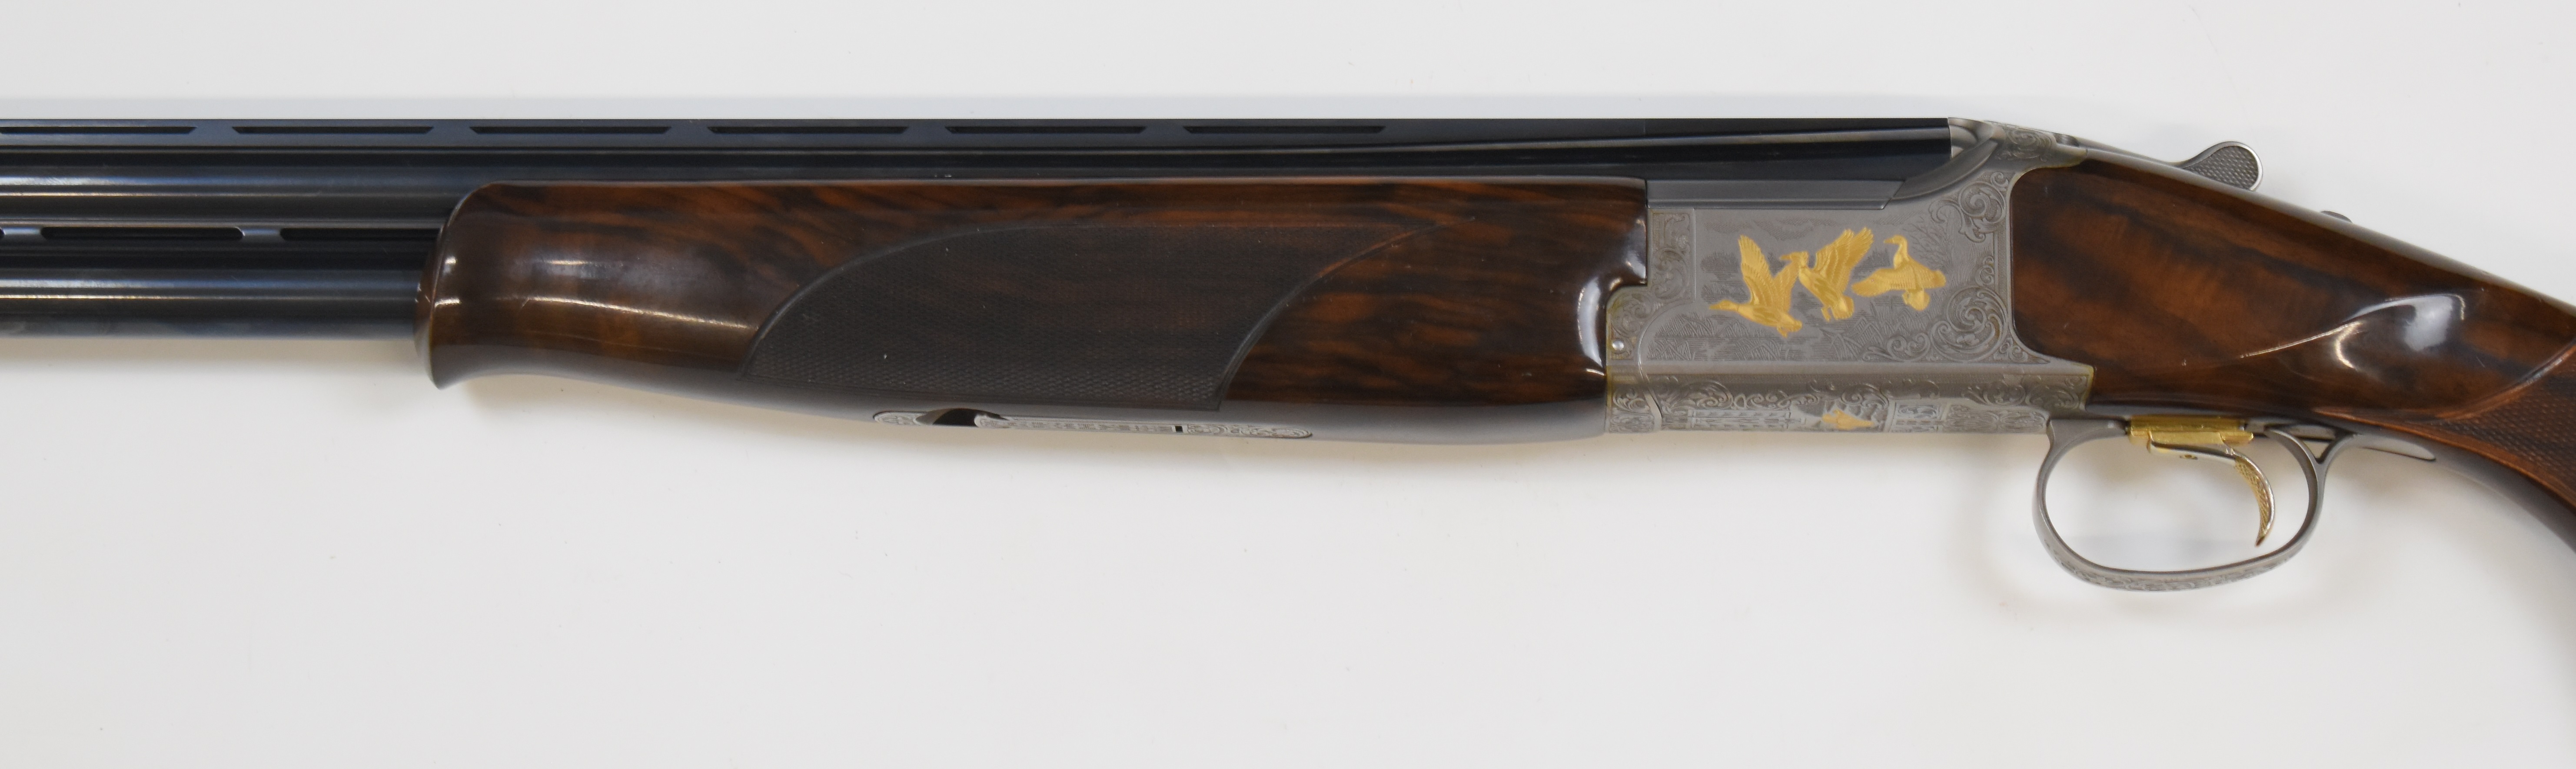 Browning B525 Ultimate 12 bore over and under ejector shotgun with gold engraving of birds - Image 11 of 12